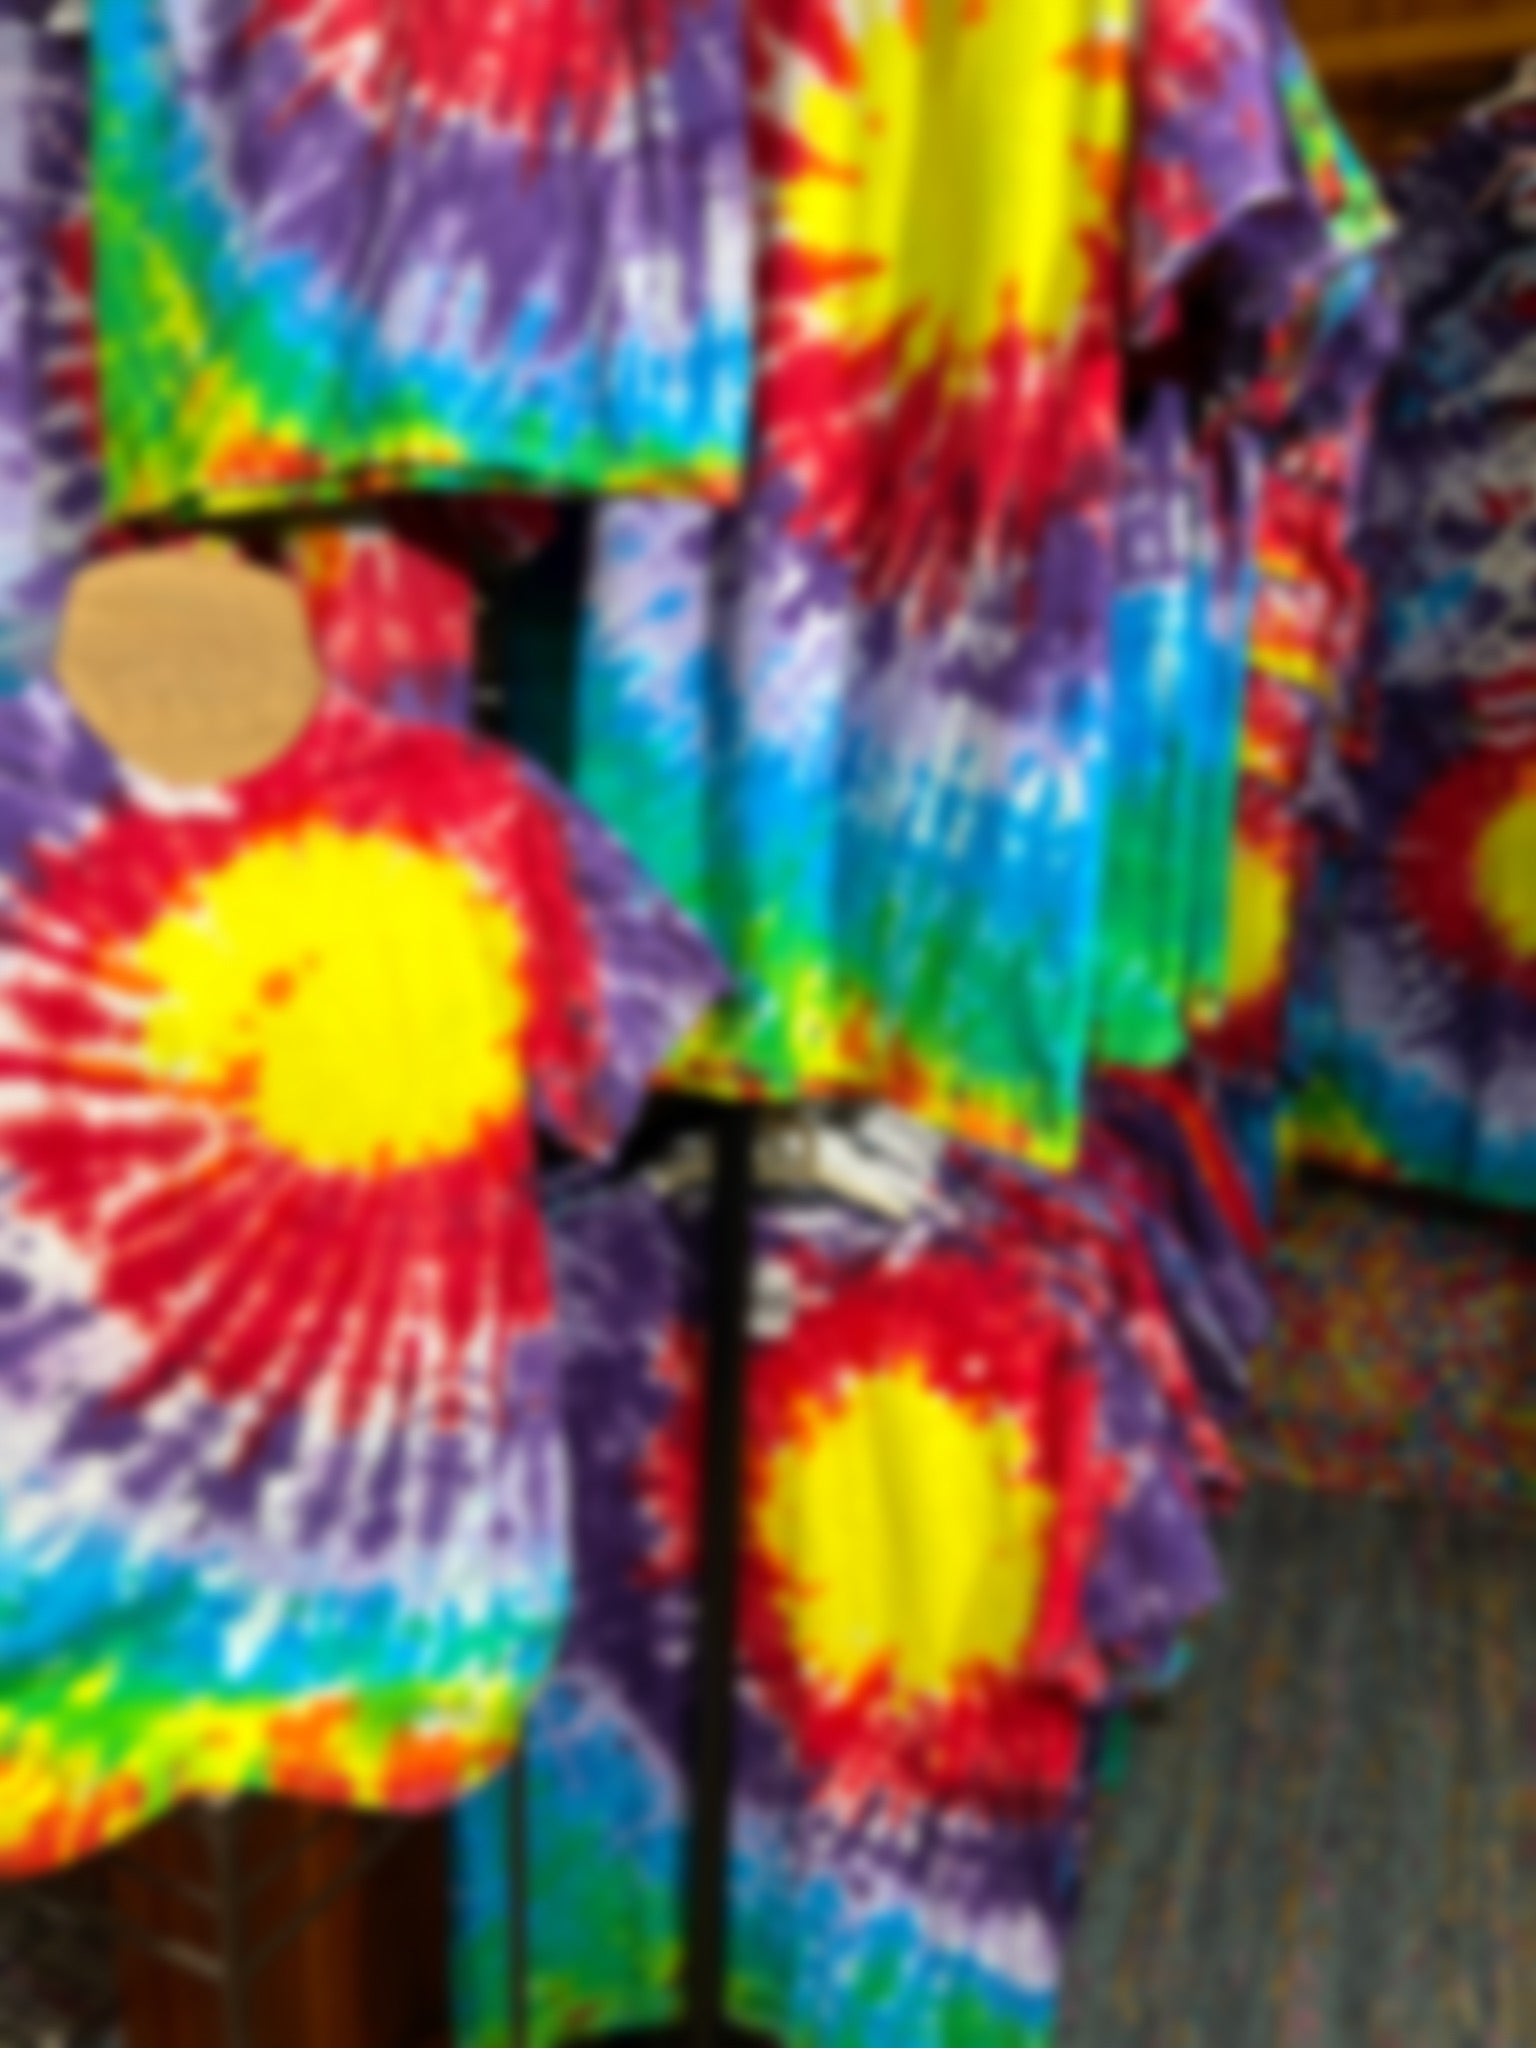 Part of a custom order for 200 logo style tie dye shirts displayed on mannequins and a clothing rack 